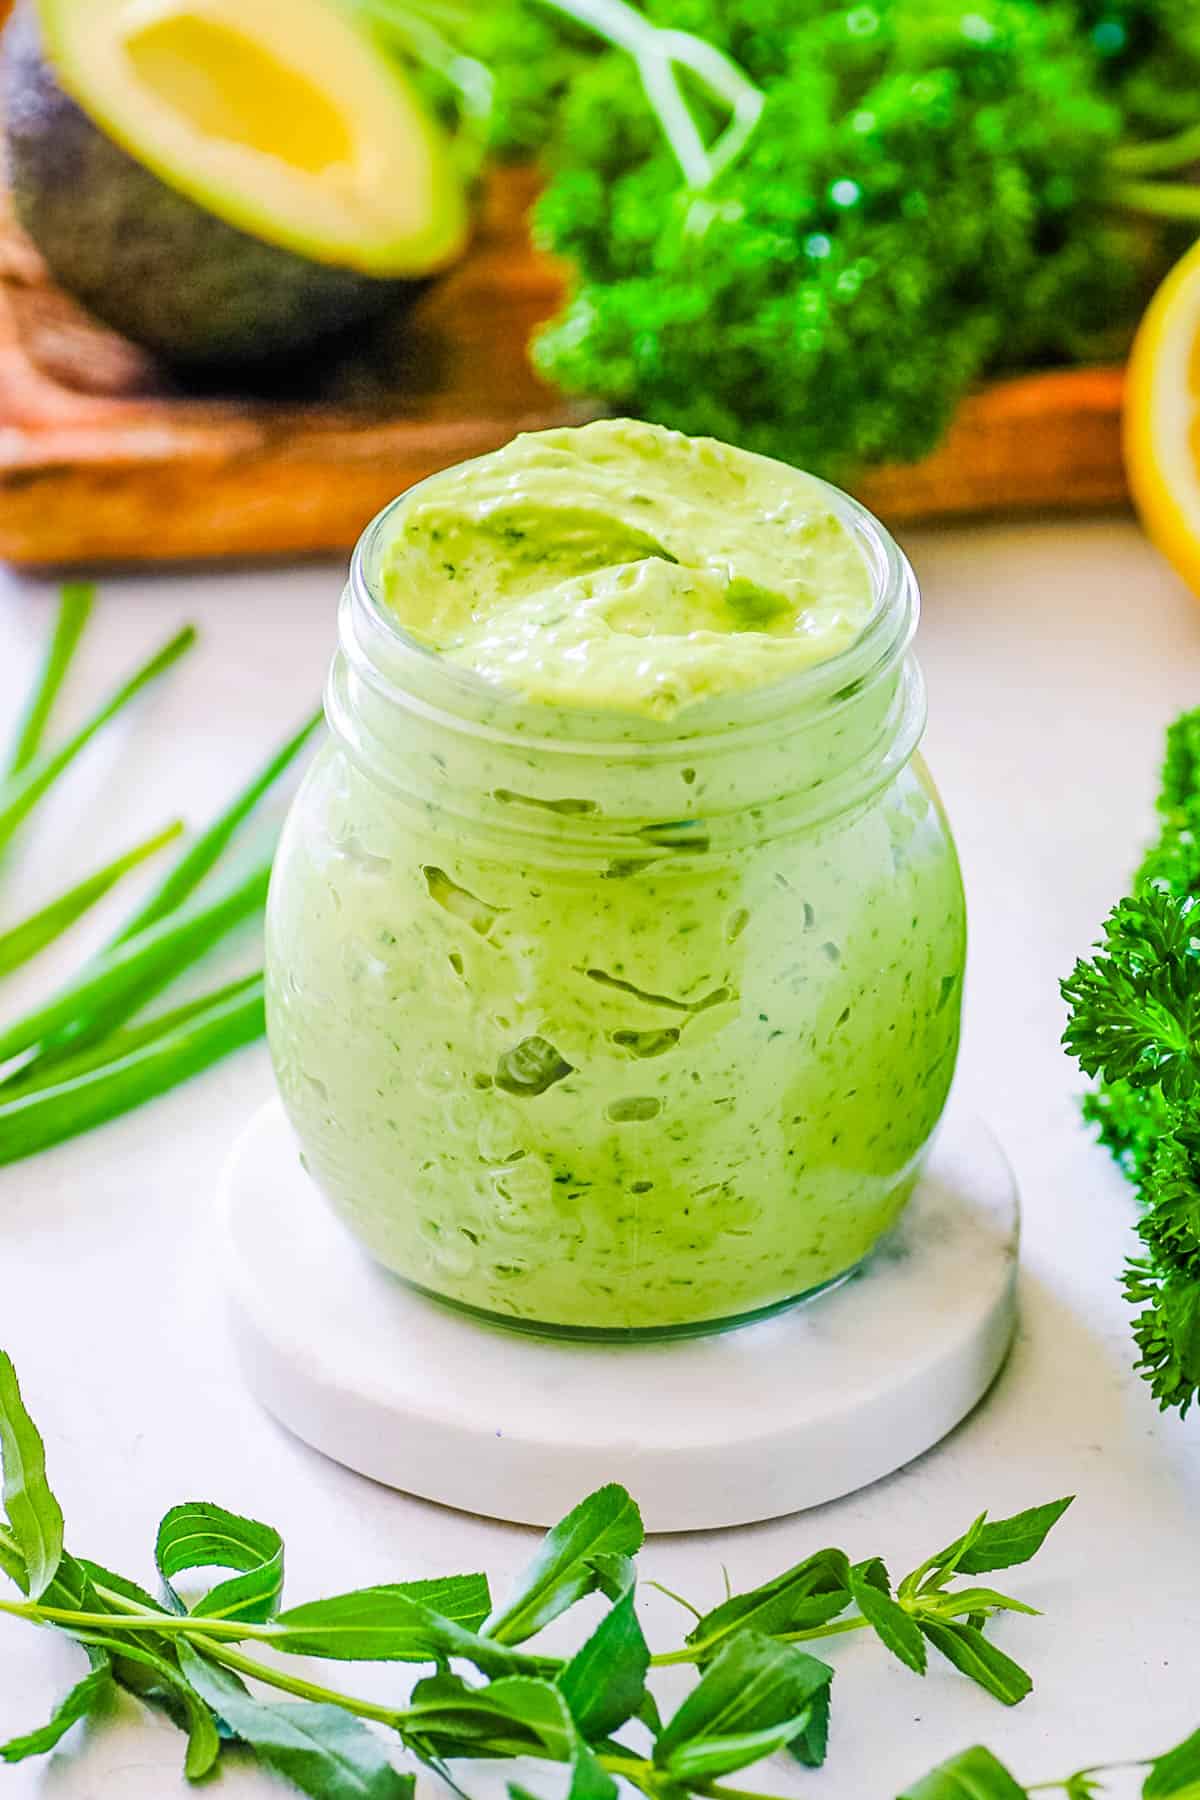 Avocado green goddess dressing in a glass jar surrounded by fresh green herbs.